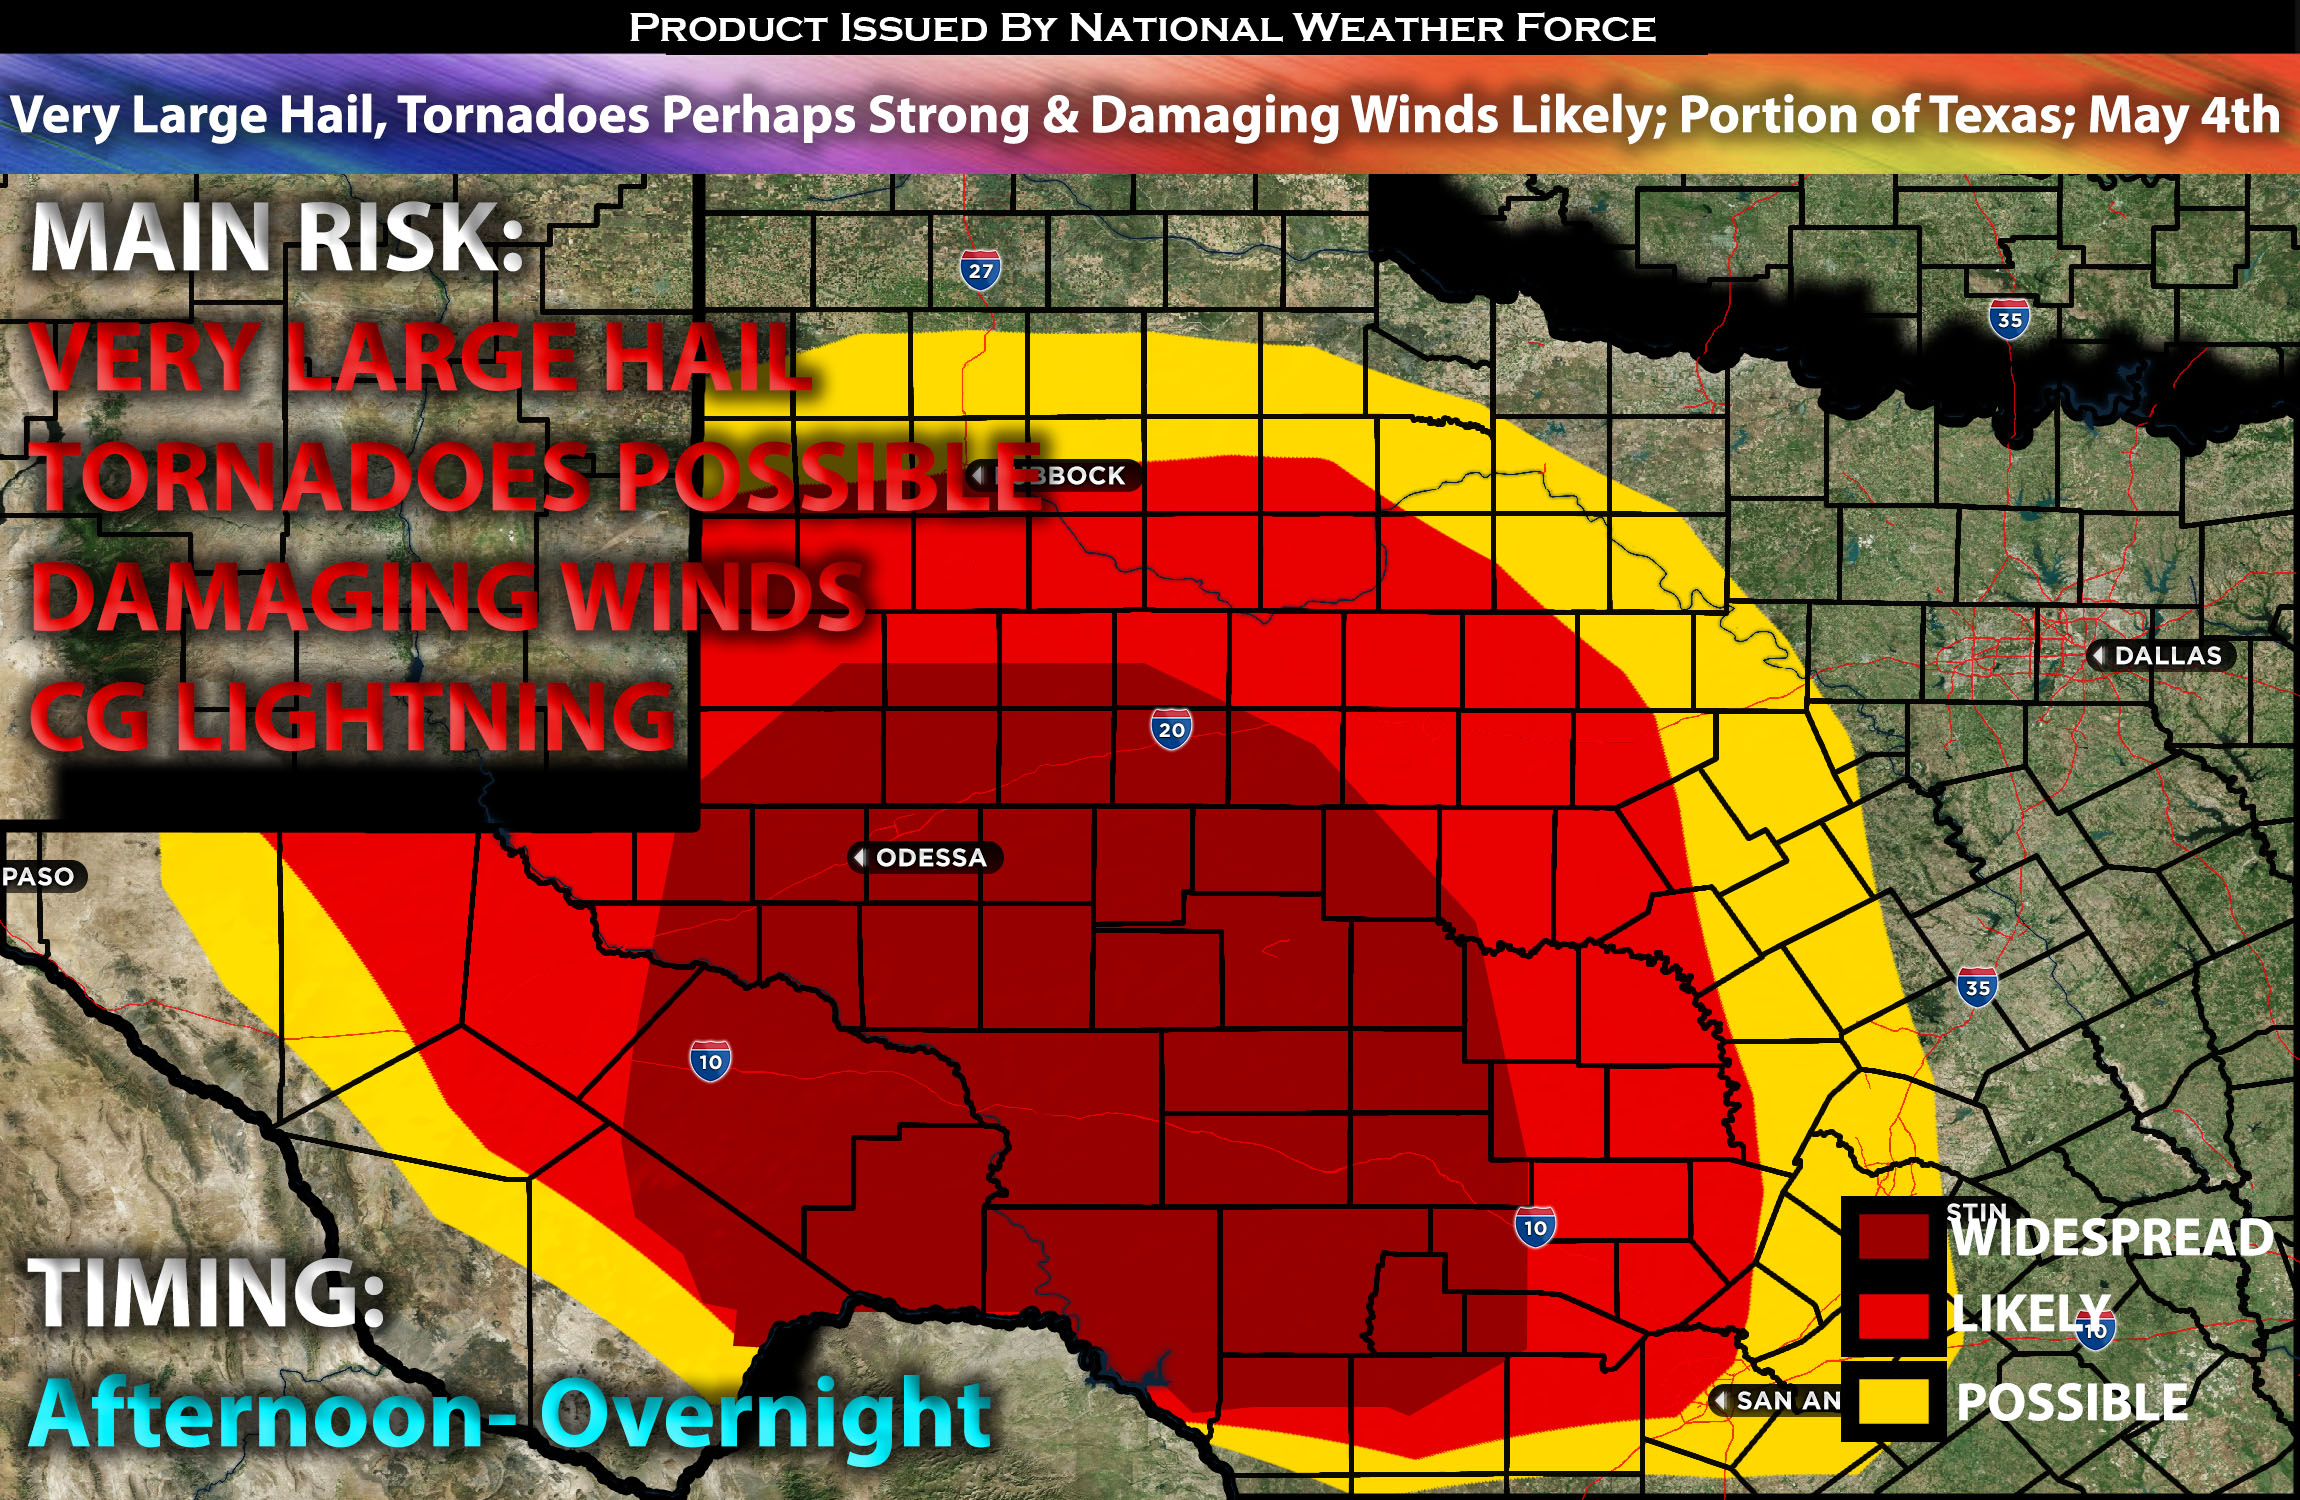 Very Large Hail, Tornadoes Perhaps Strong & Damaging Winds Likely; Portion of Texas; May 4th